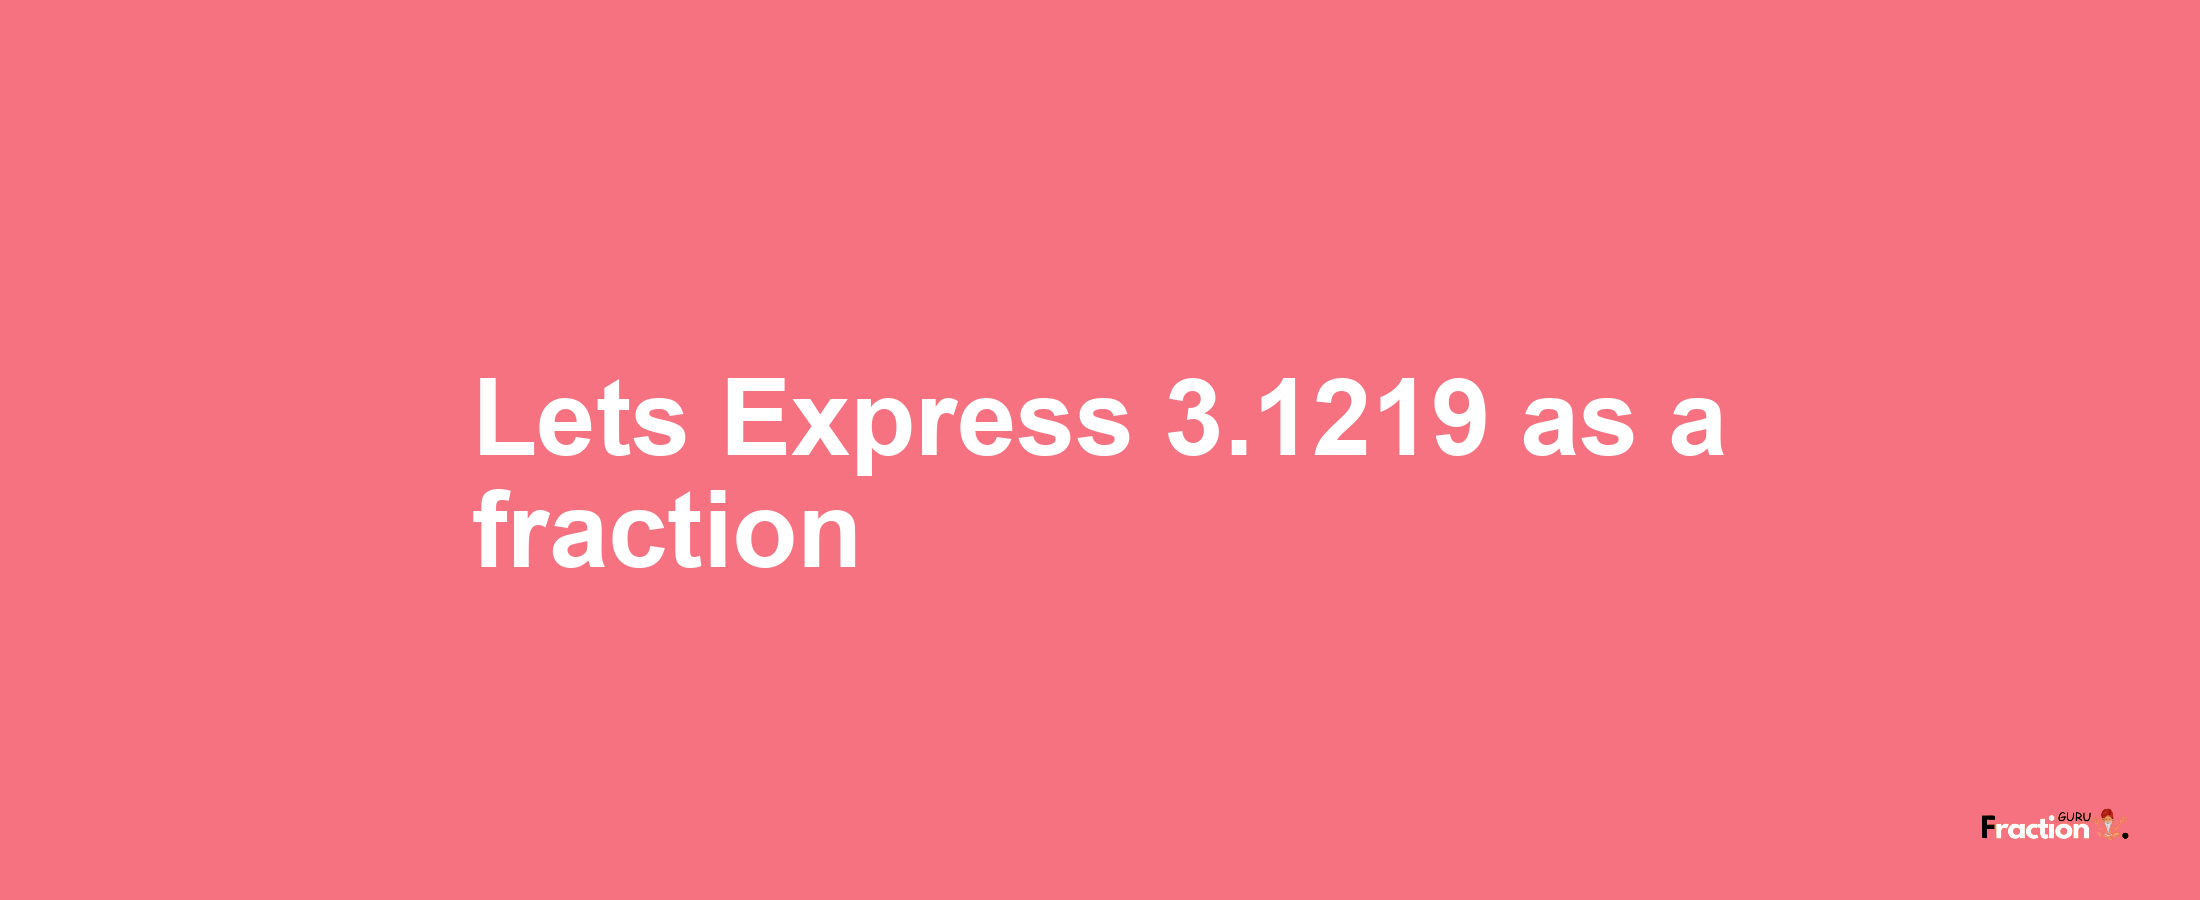 Lets Express 3.1219 as afraction